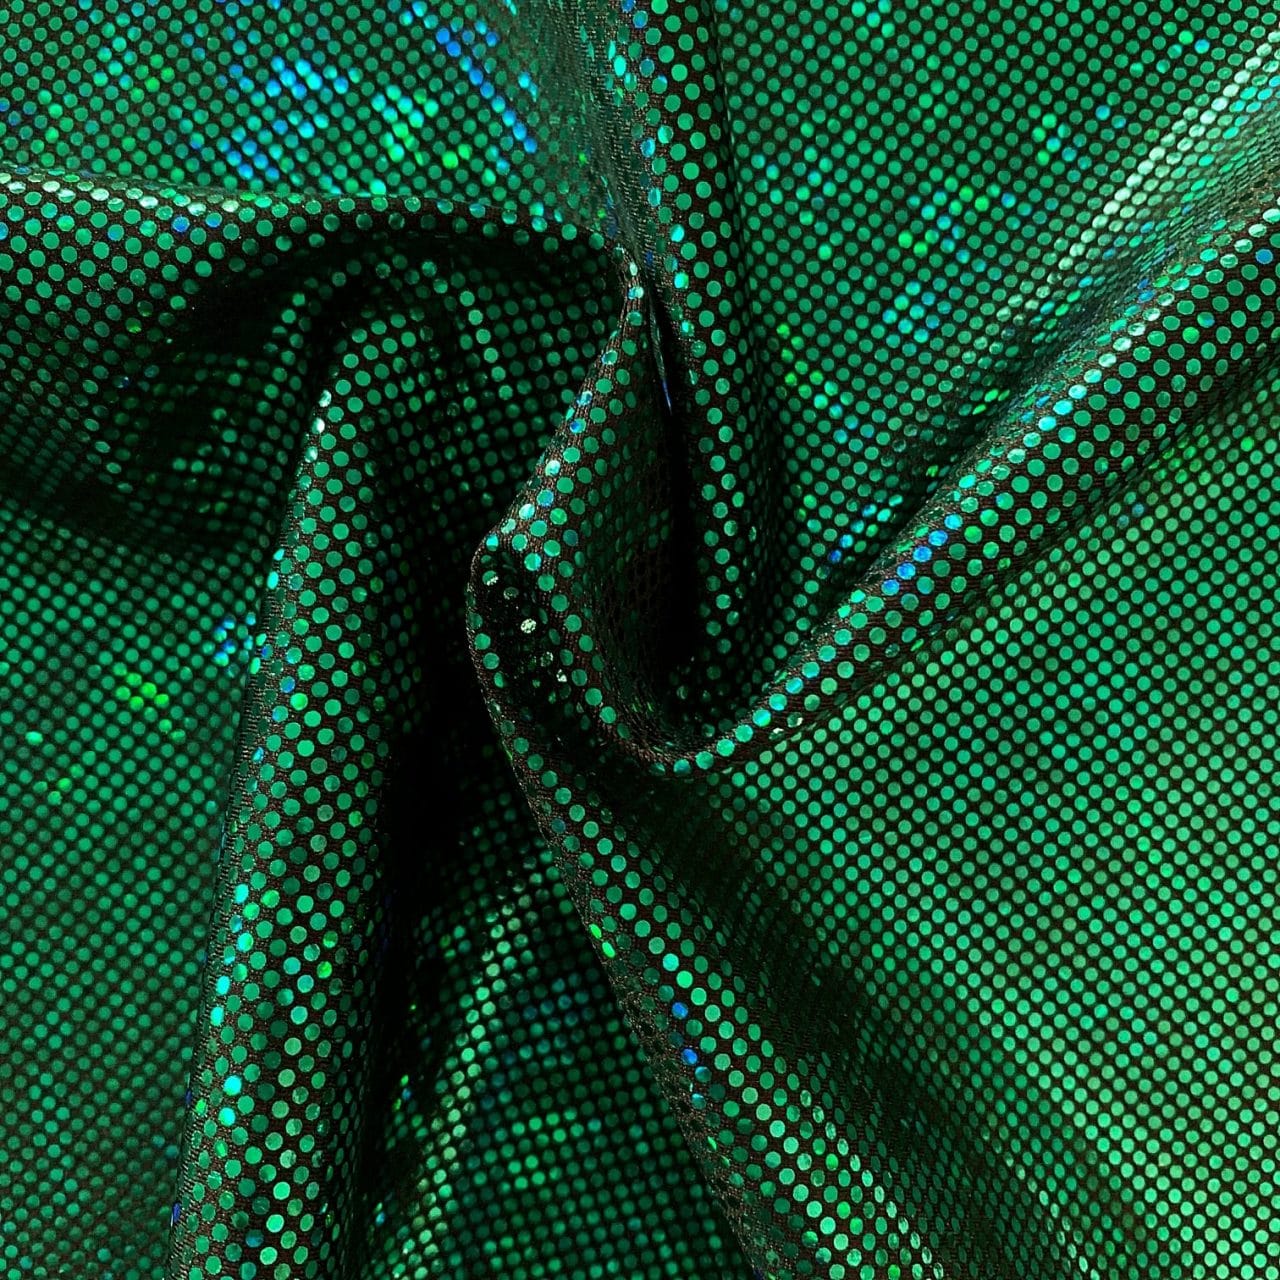 Kelly Green Shattered Glass Fabric - SOLID STONE FABRICS, INC.